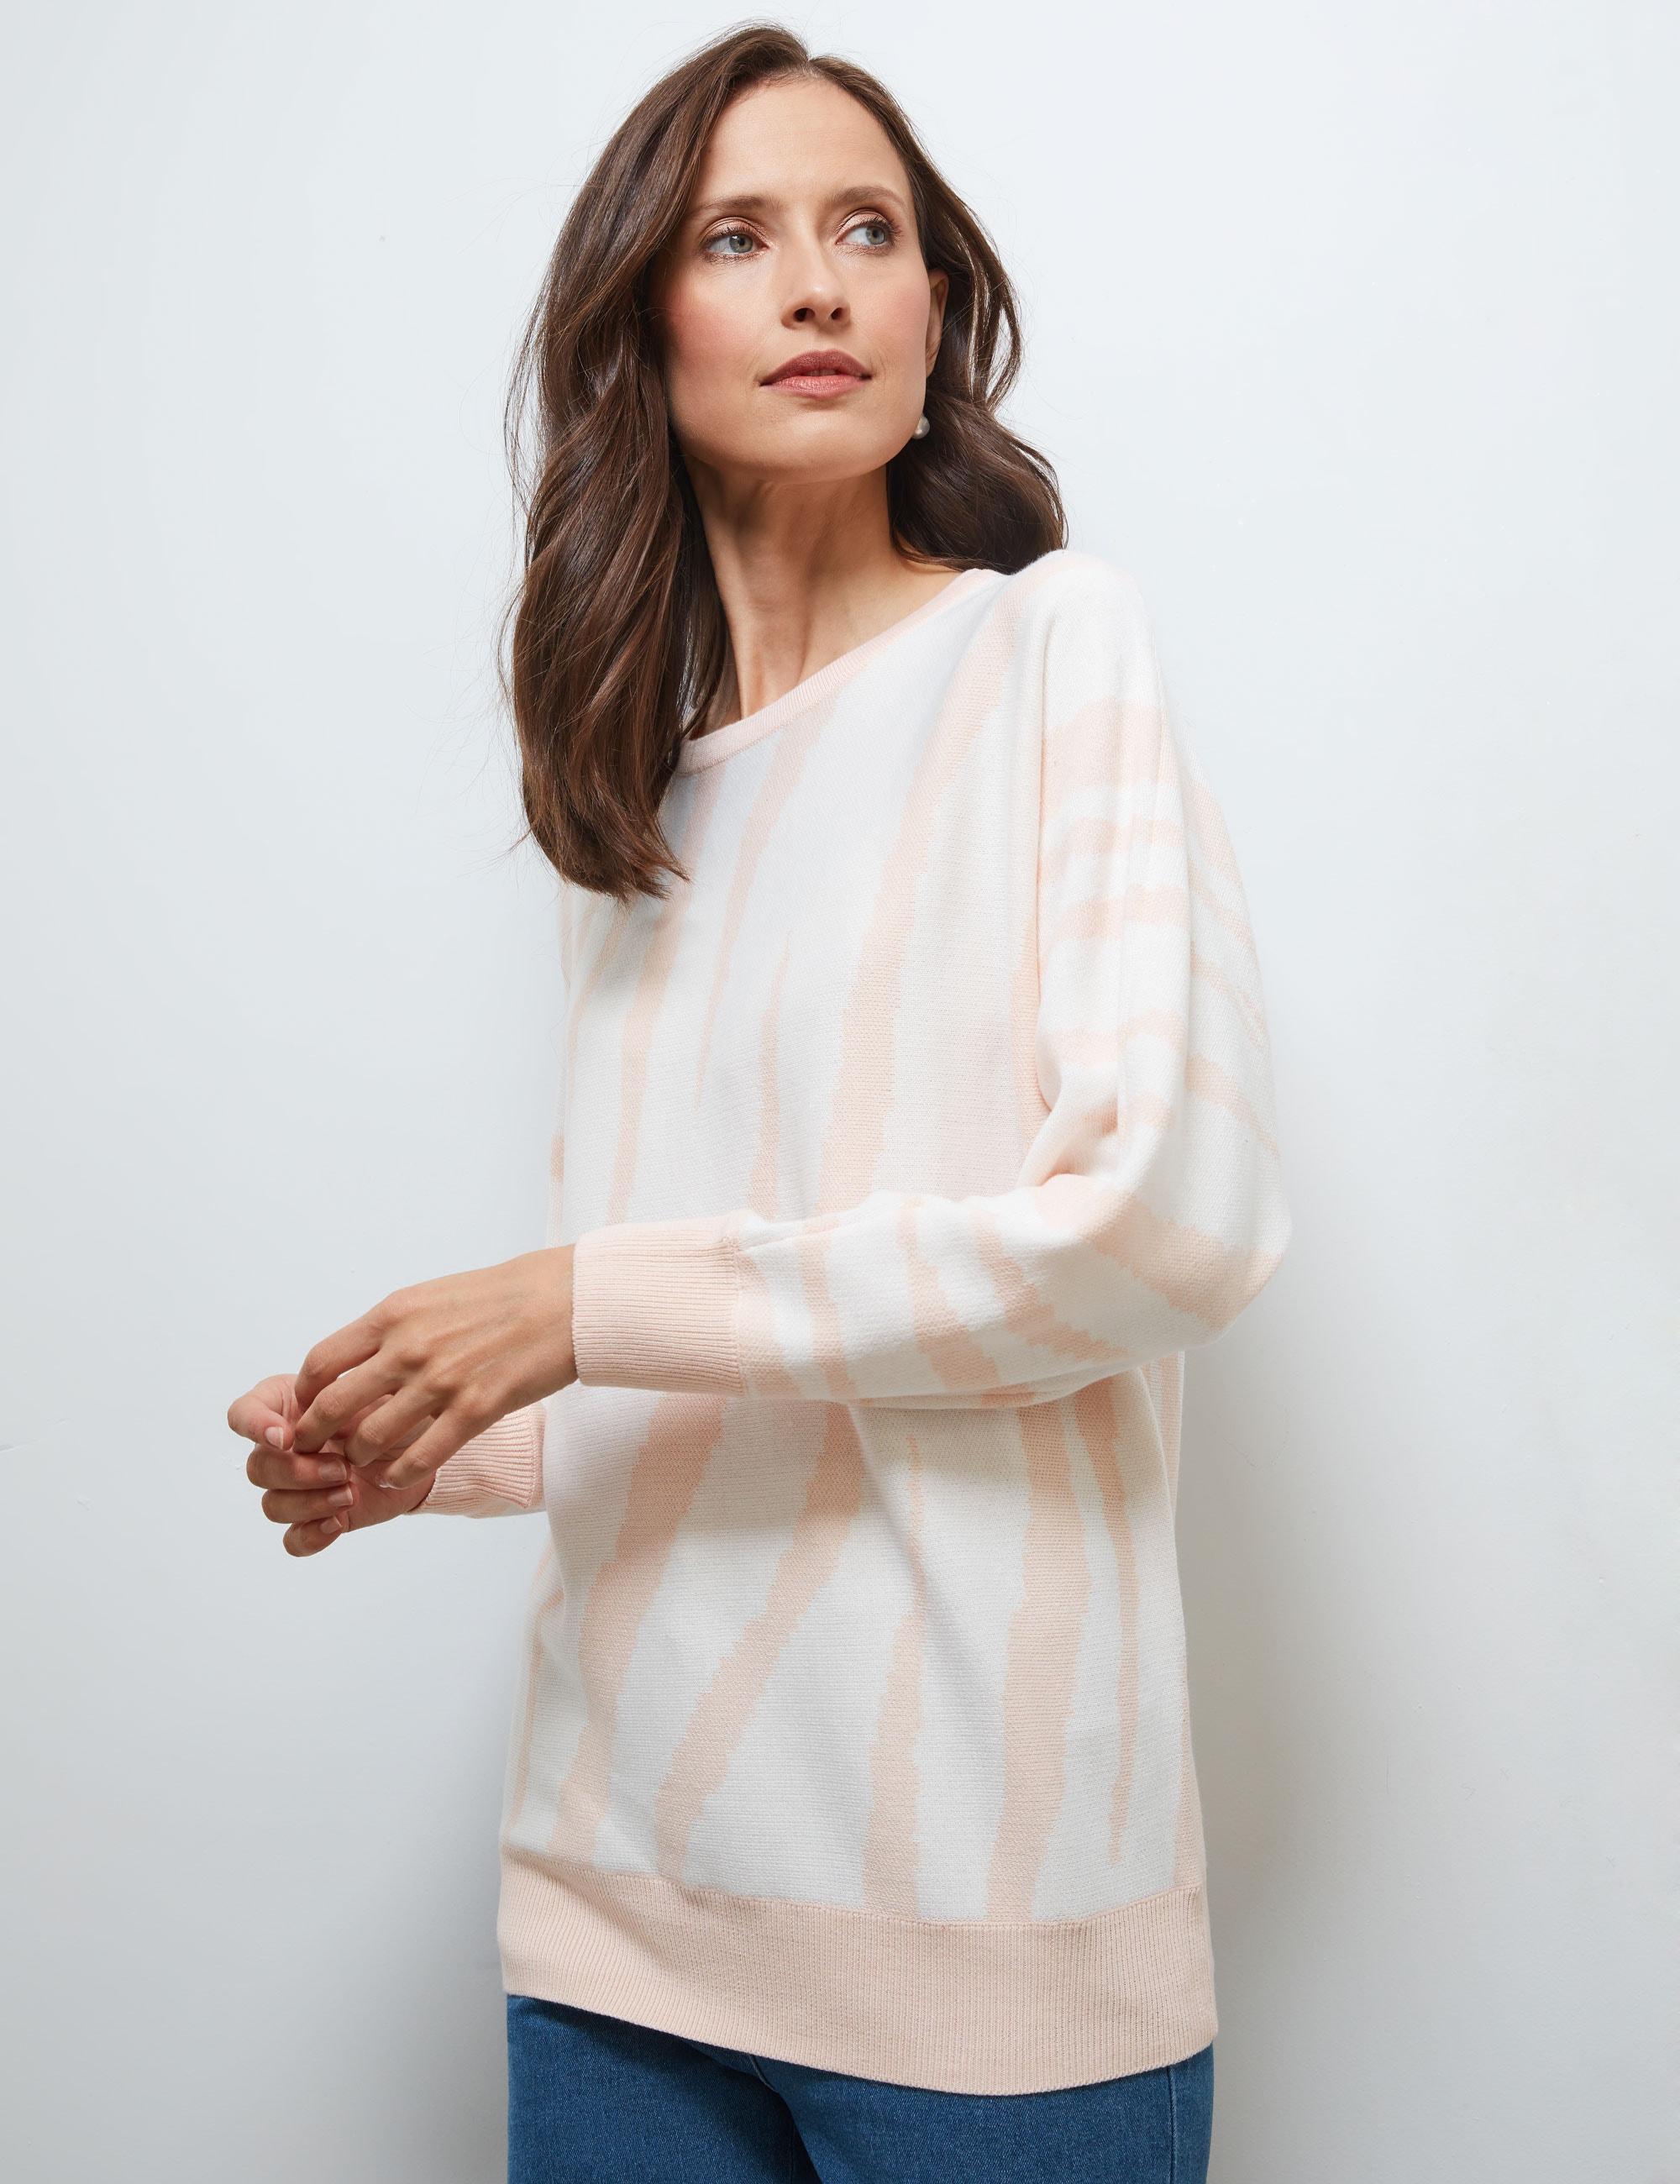 NONI B - Womens Jumper - Long Winter Sweater - Pink Pullover Warm Wool Clothing - Long Sleeve - Pearl Blush Abstract - Boat Neck - Zebra Jacquard